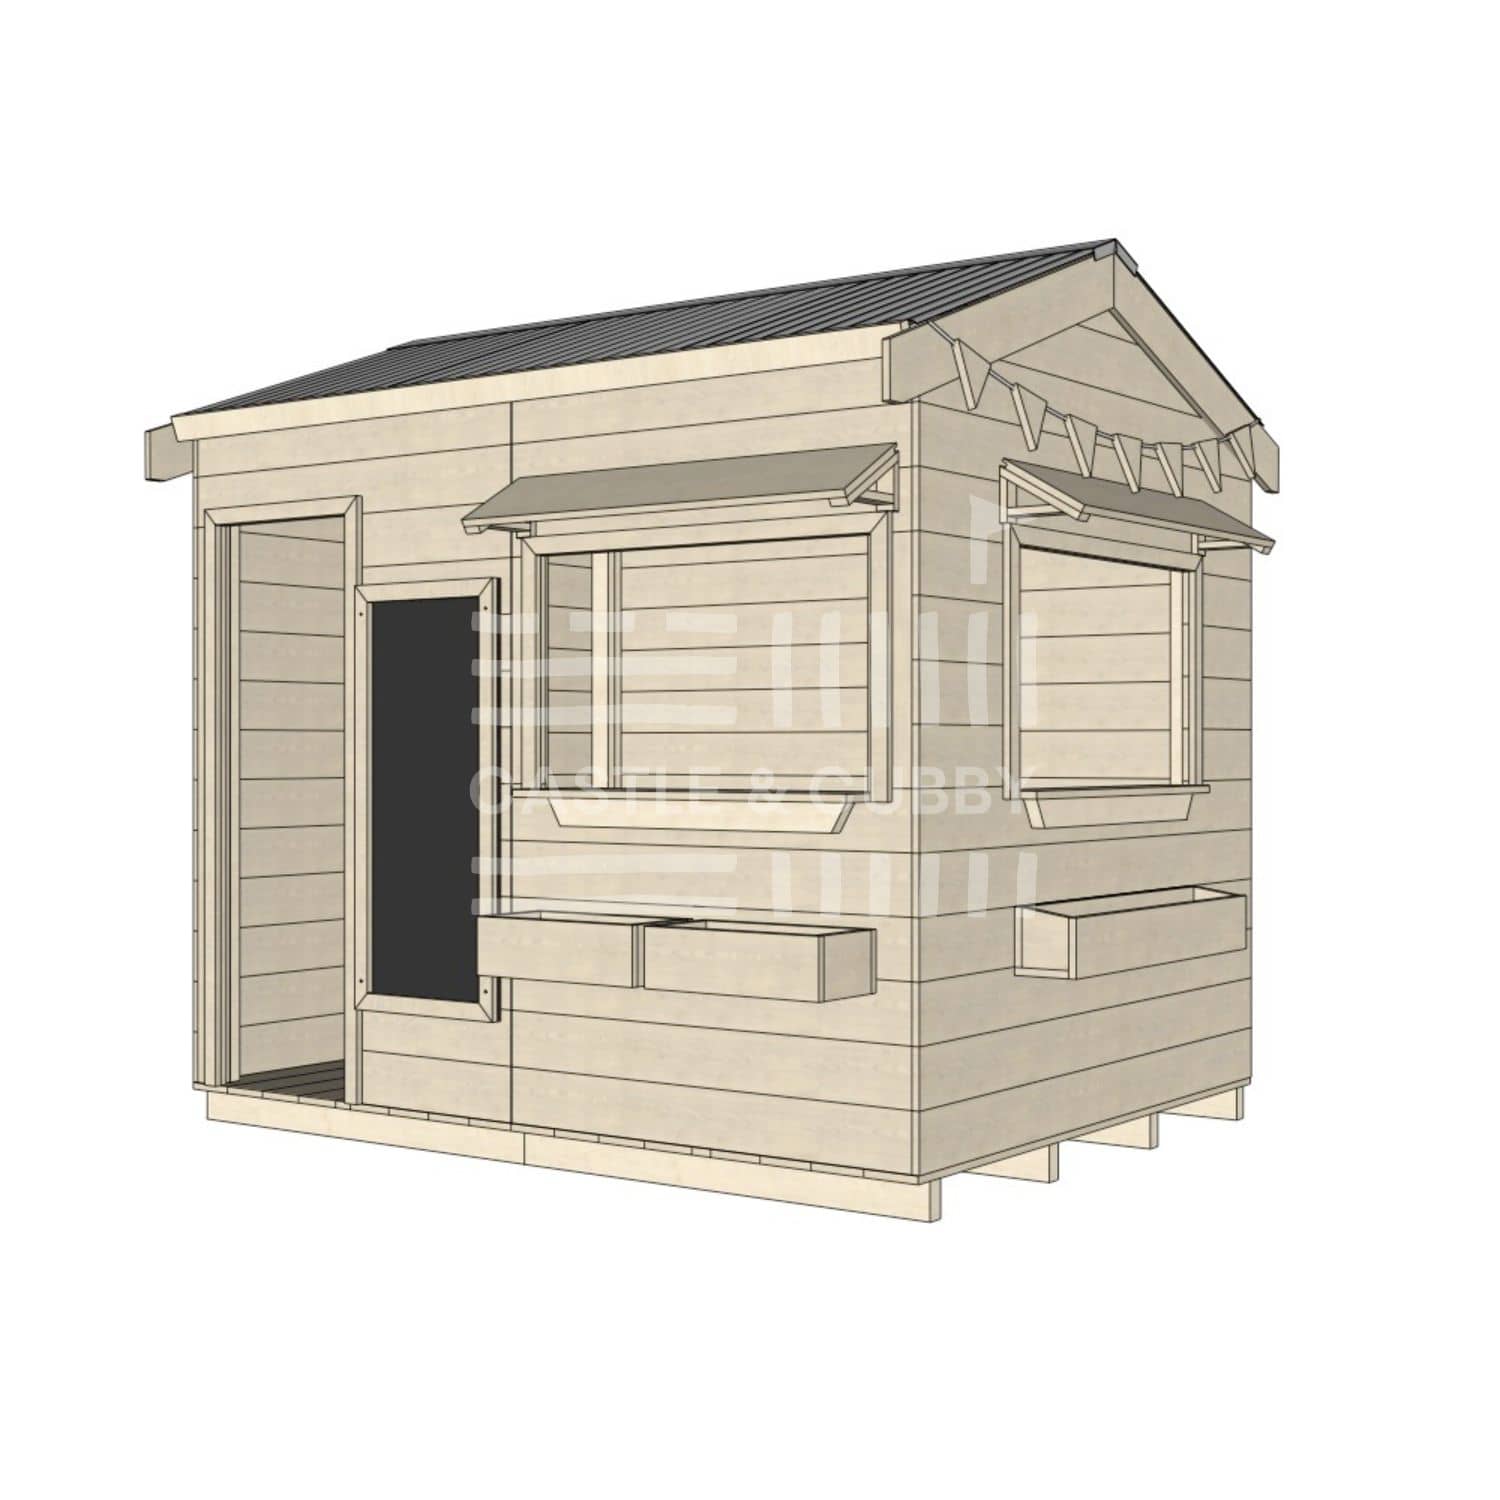 Pitched roof extra height raw wooden cubby house commercial education large rectangle accessories